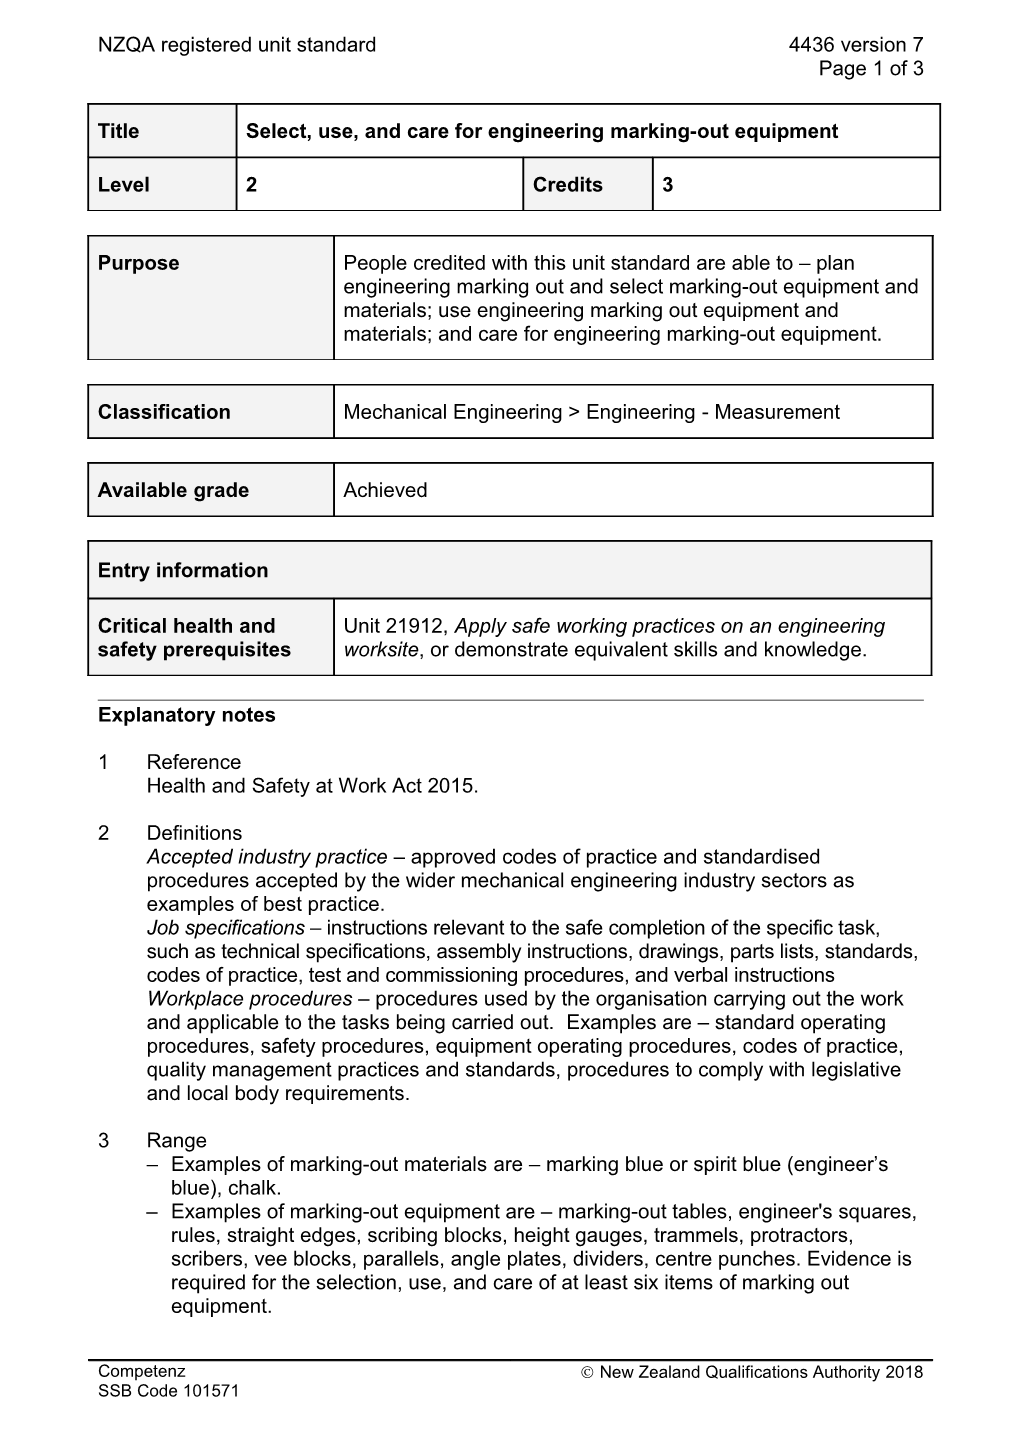 4436 Select, Use, and Care for Engineering Marking-Out Equipment